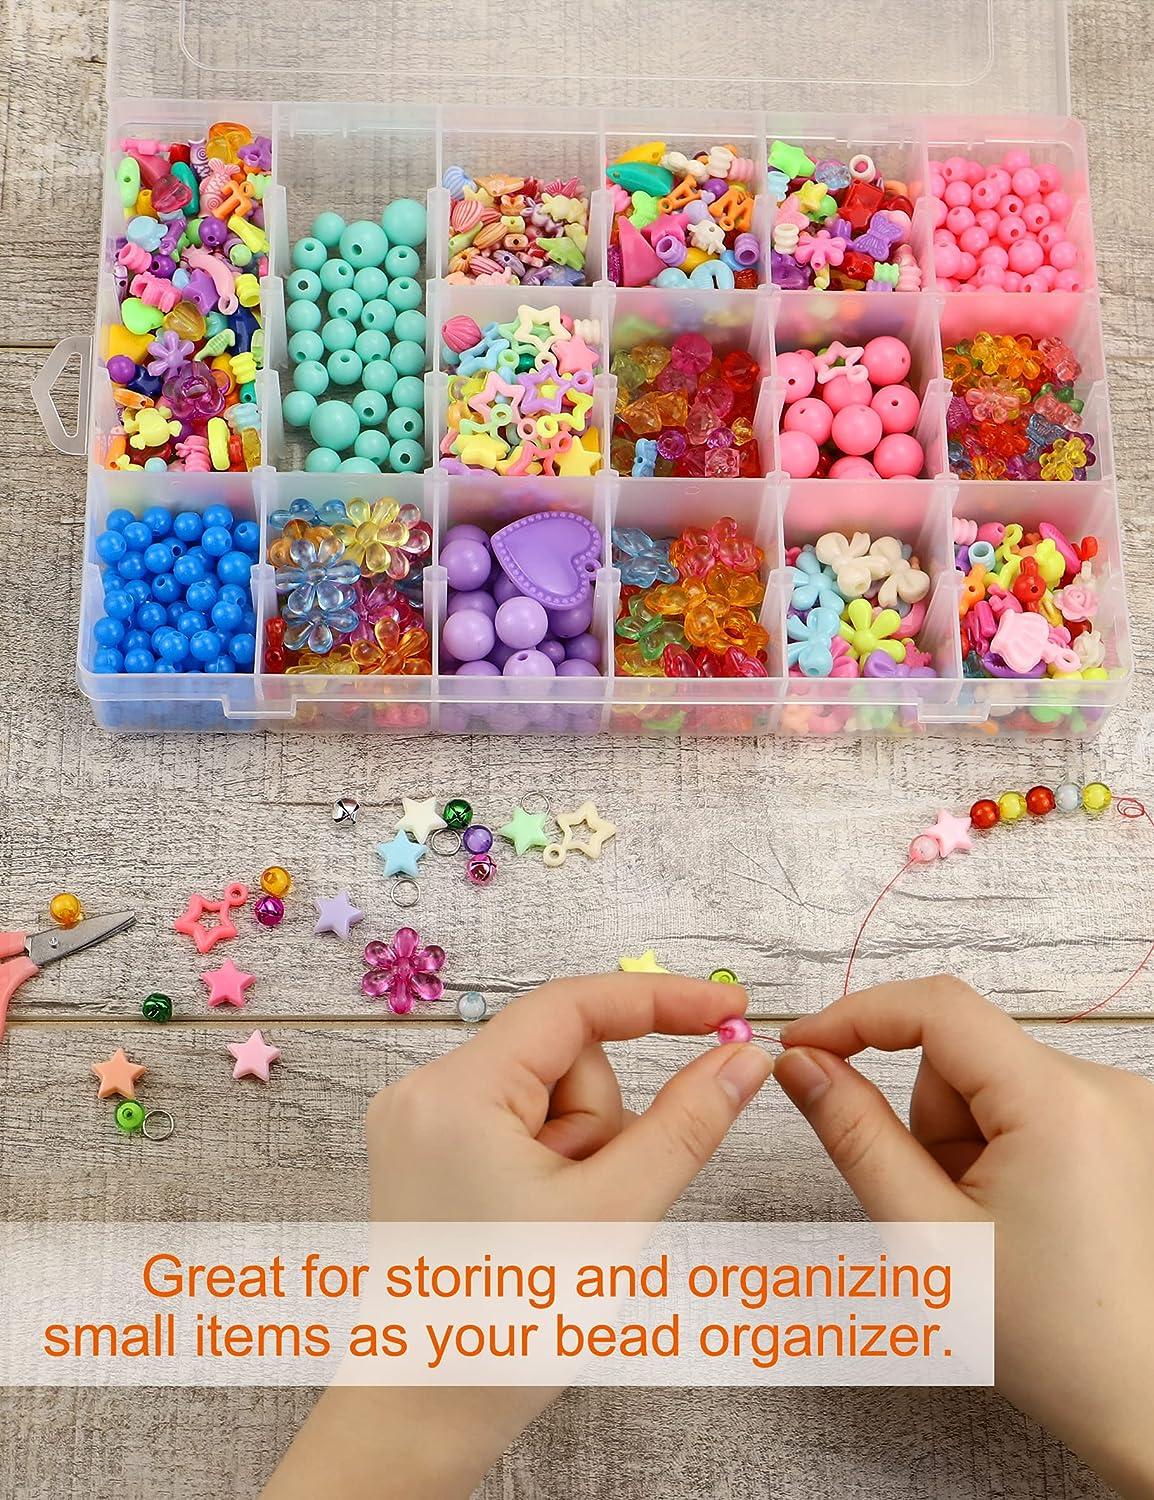 Sjqecyfv Tackle Box Organizer 18 Grids Plastic Craft Box Organizer Bead  Organizer Clear Fishing Box with Dividers, 1 Pack 18 Grids,1 Pack